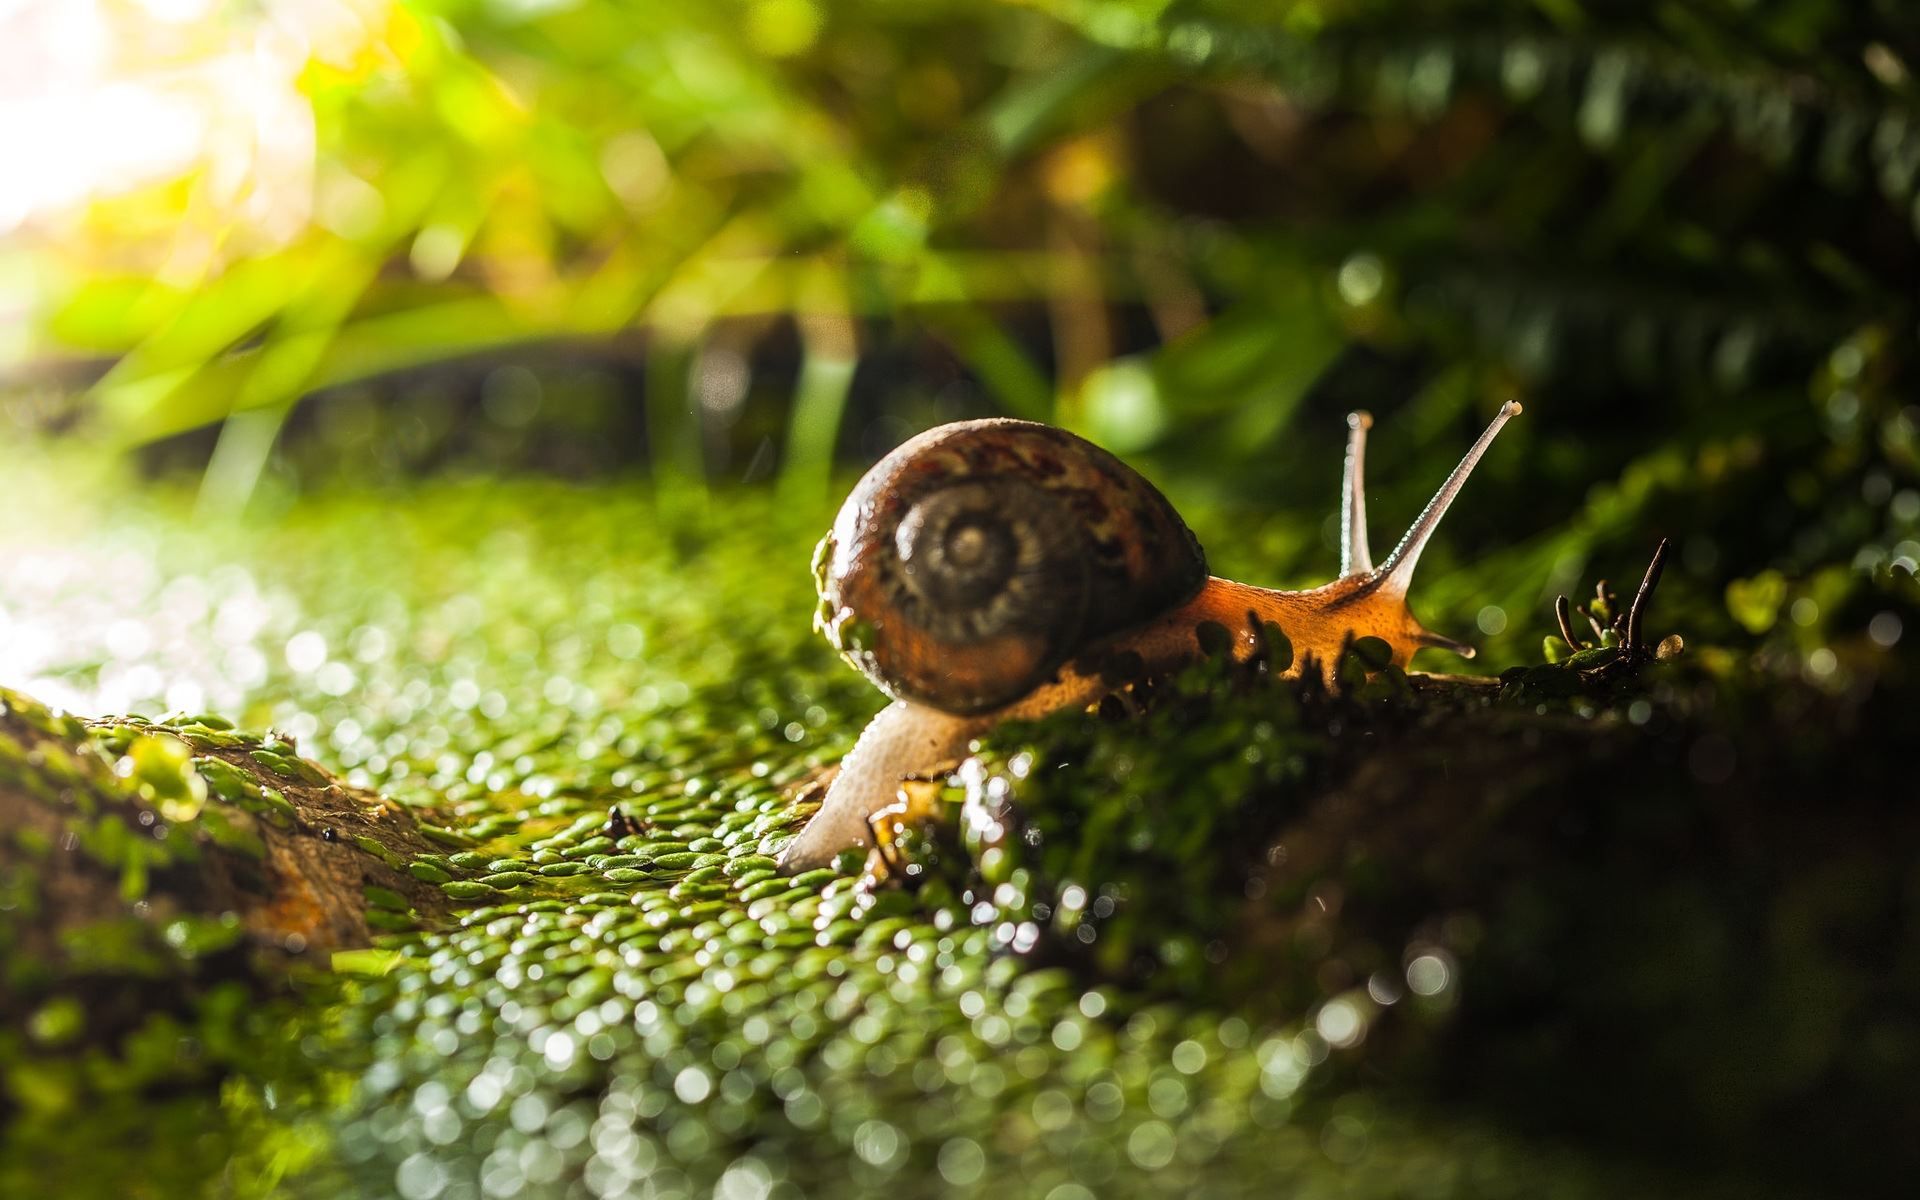 Snail HD Wallpapers and Backgrounds | HD Wallpapers | Pinterest ...